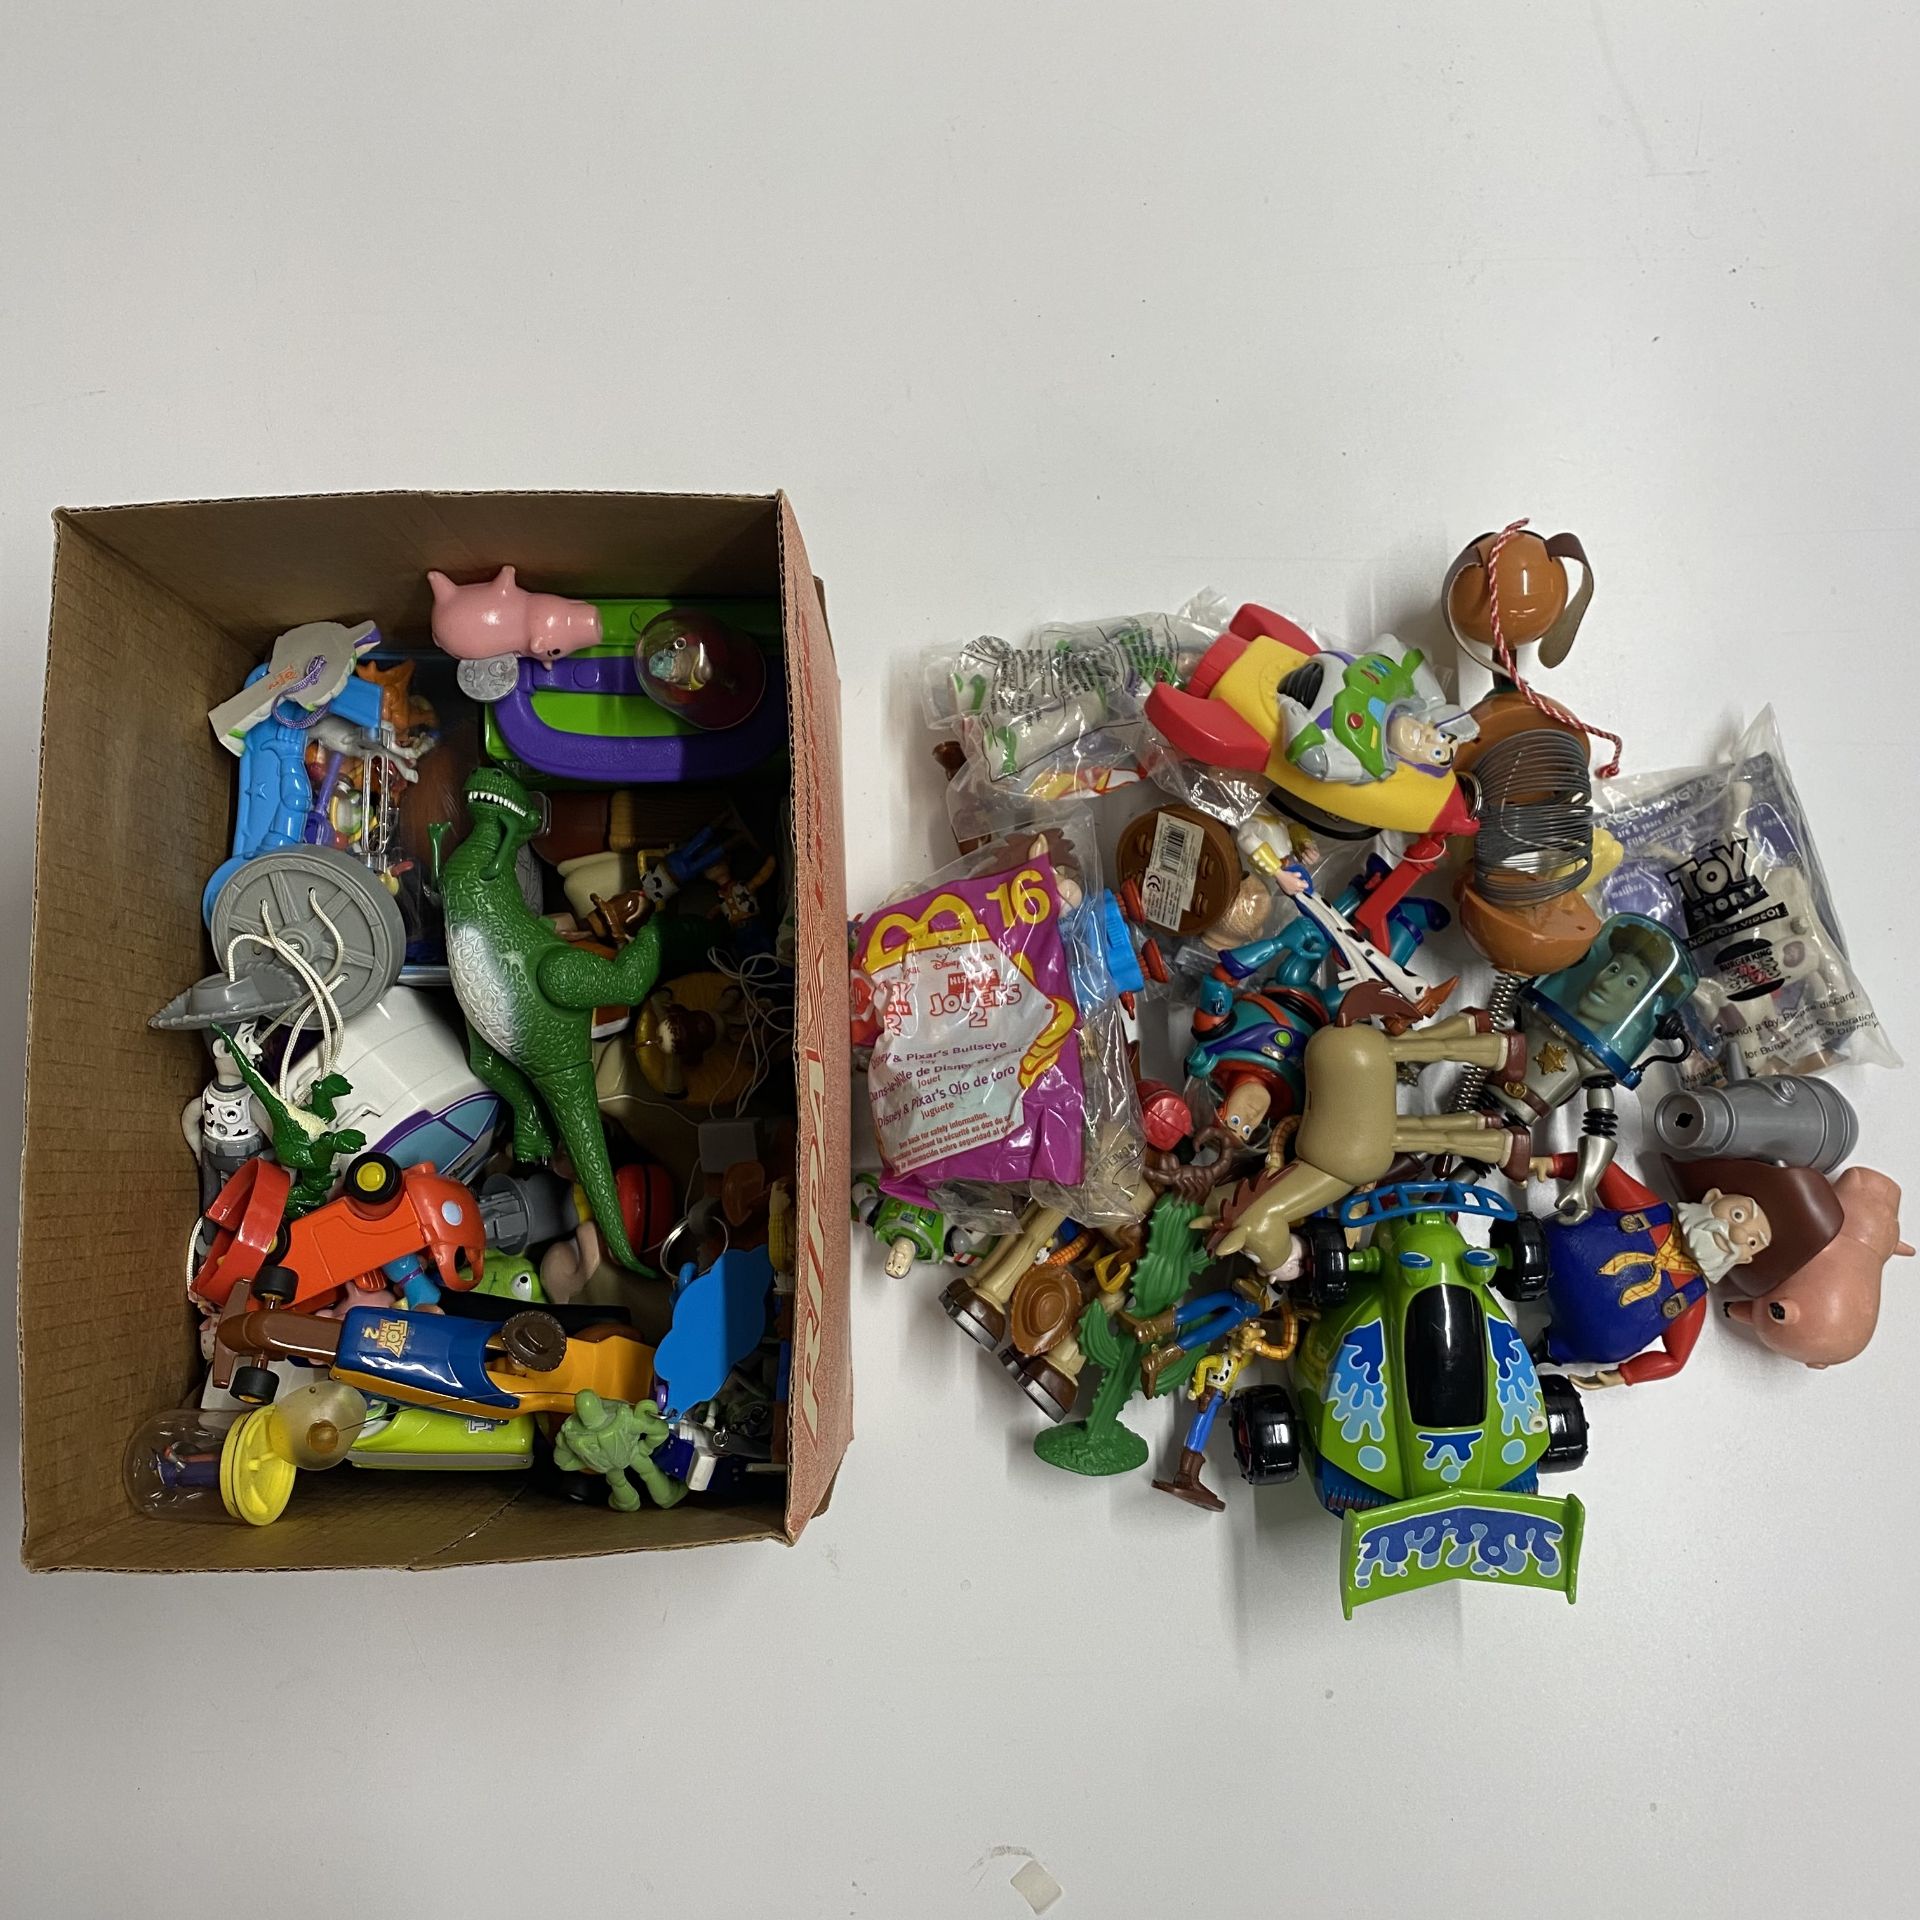 A box containing Disney Toy Story figures etc.